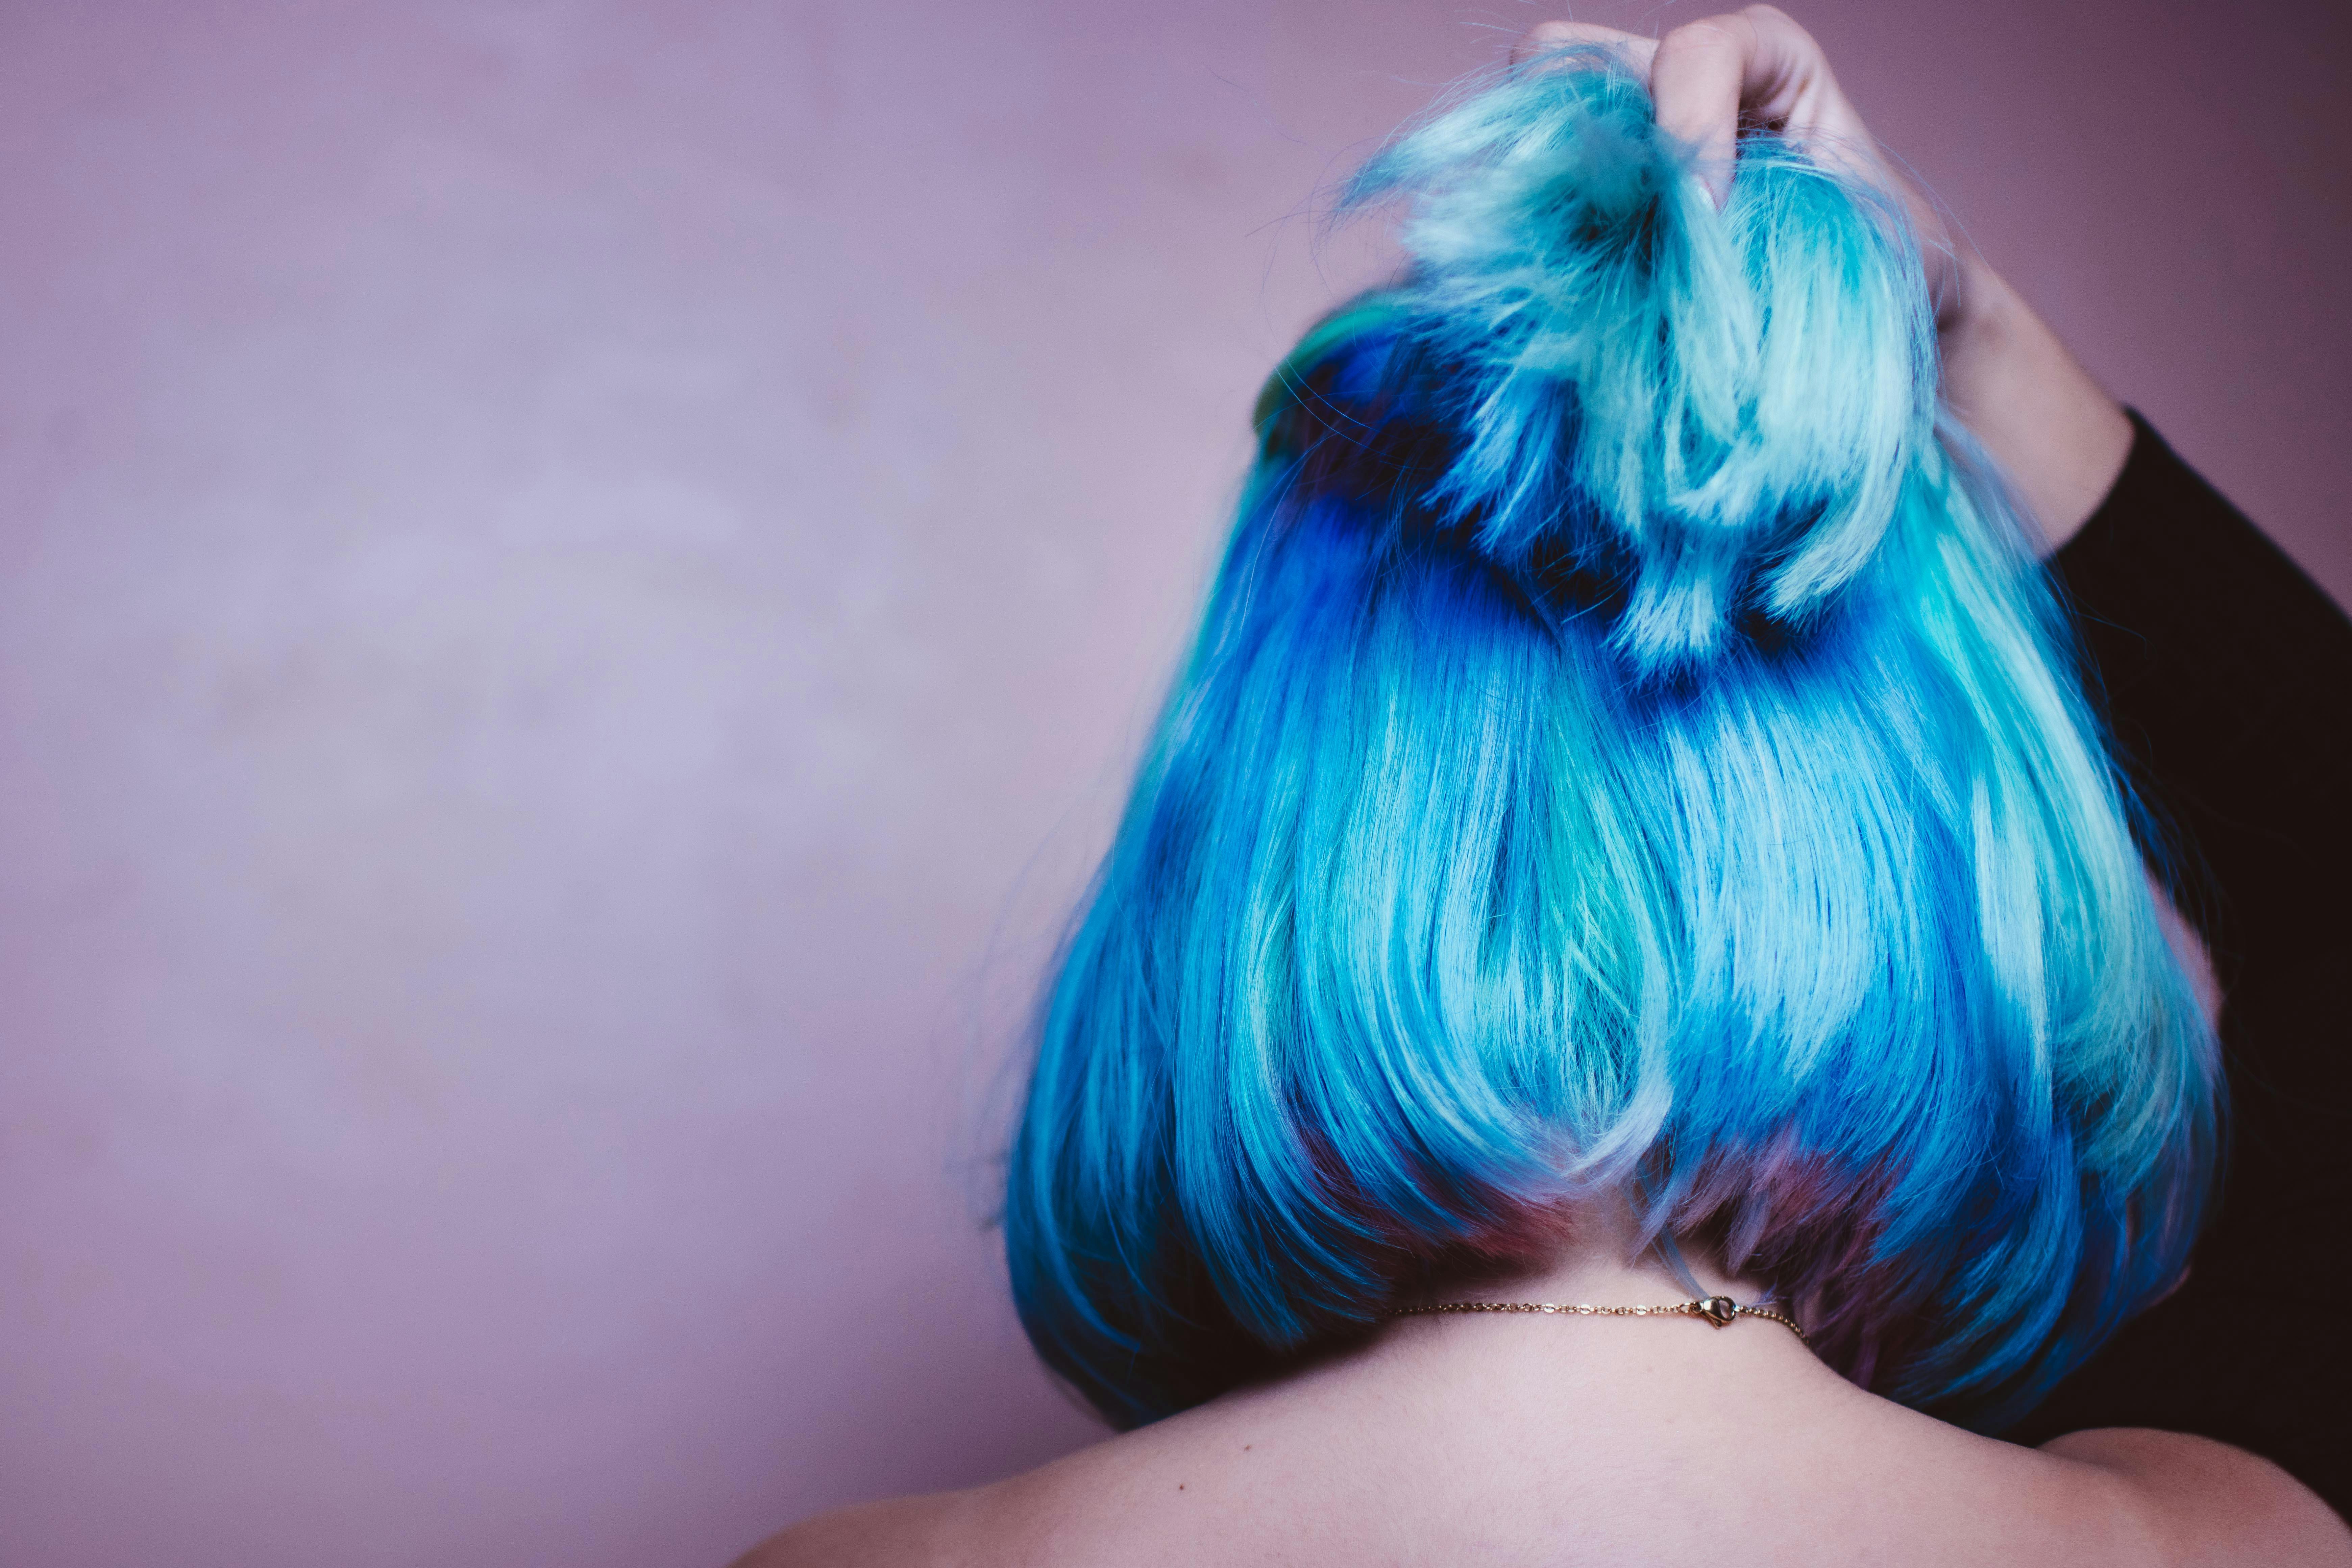 2. 20 Stunning Examples of Light Blue Hair with Dark Roots - wide 4